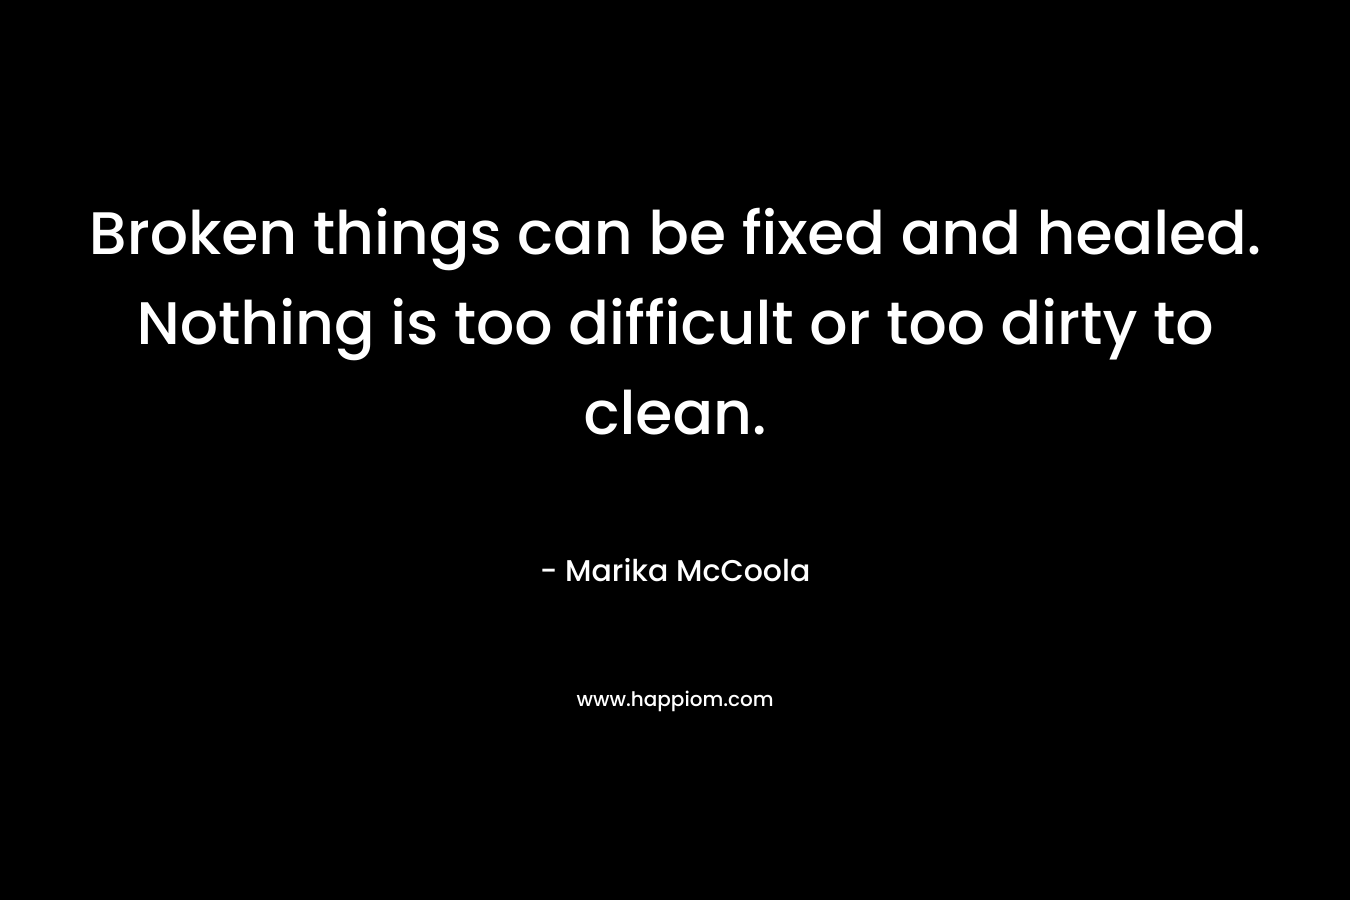 Broken things can be fixed and healed. Nothing is too difficult or too dirty to clean. – Marika McCoola